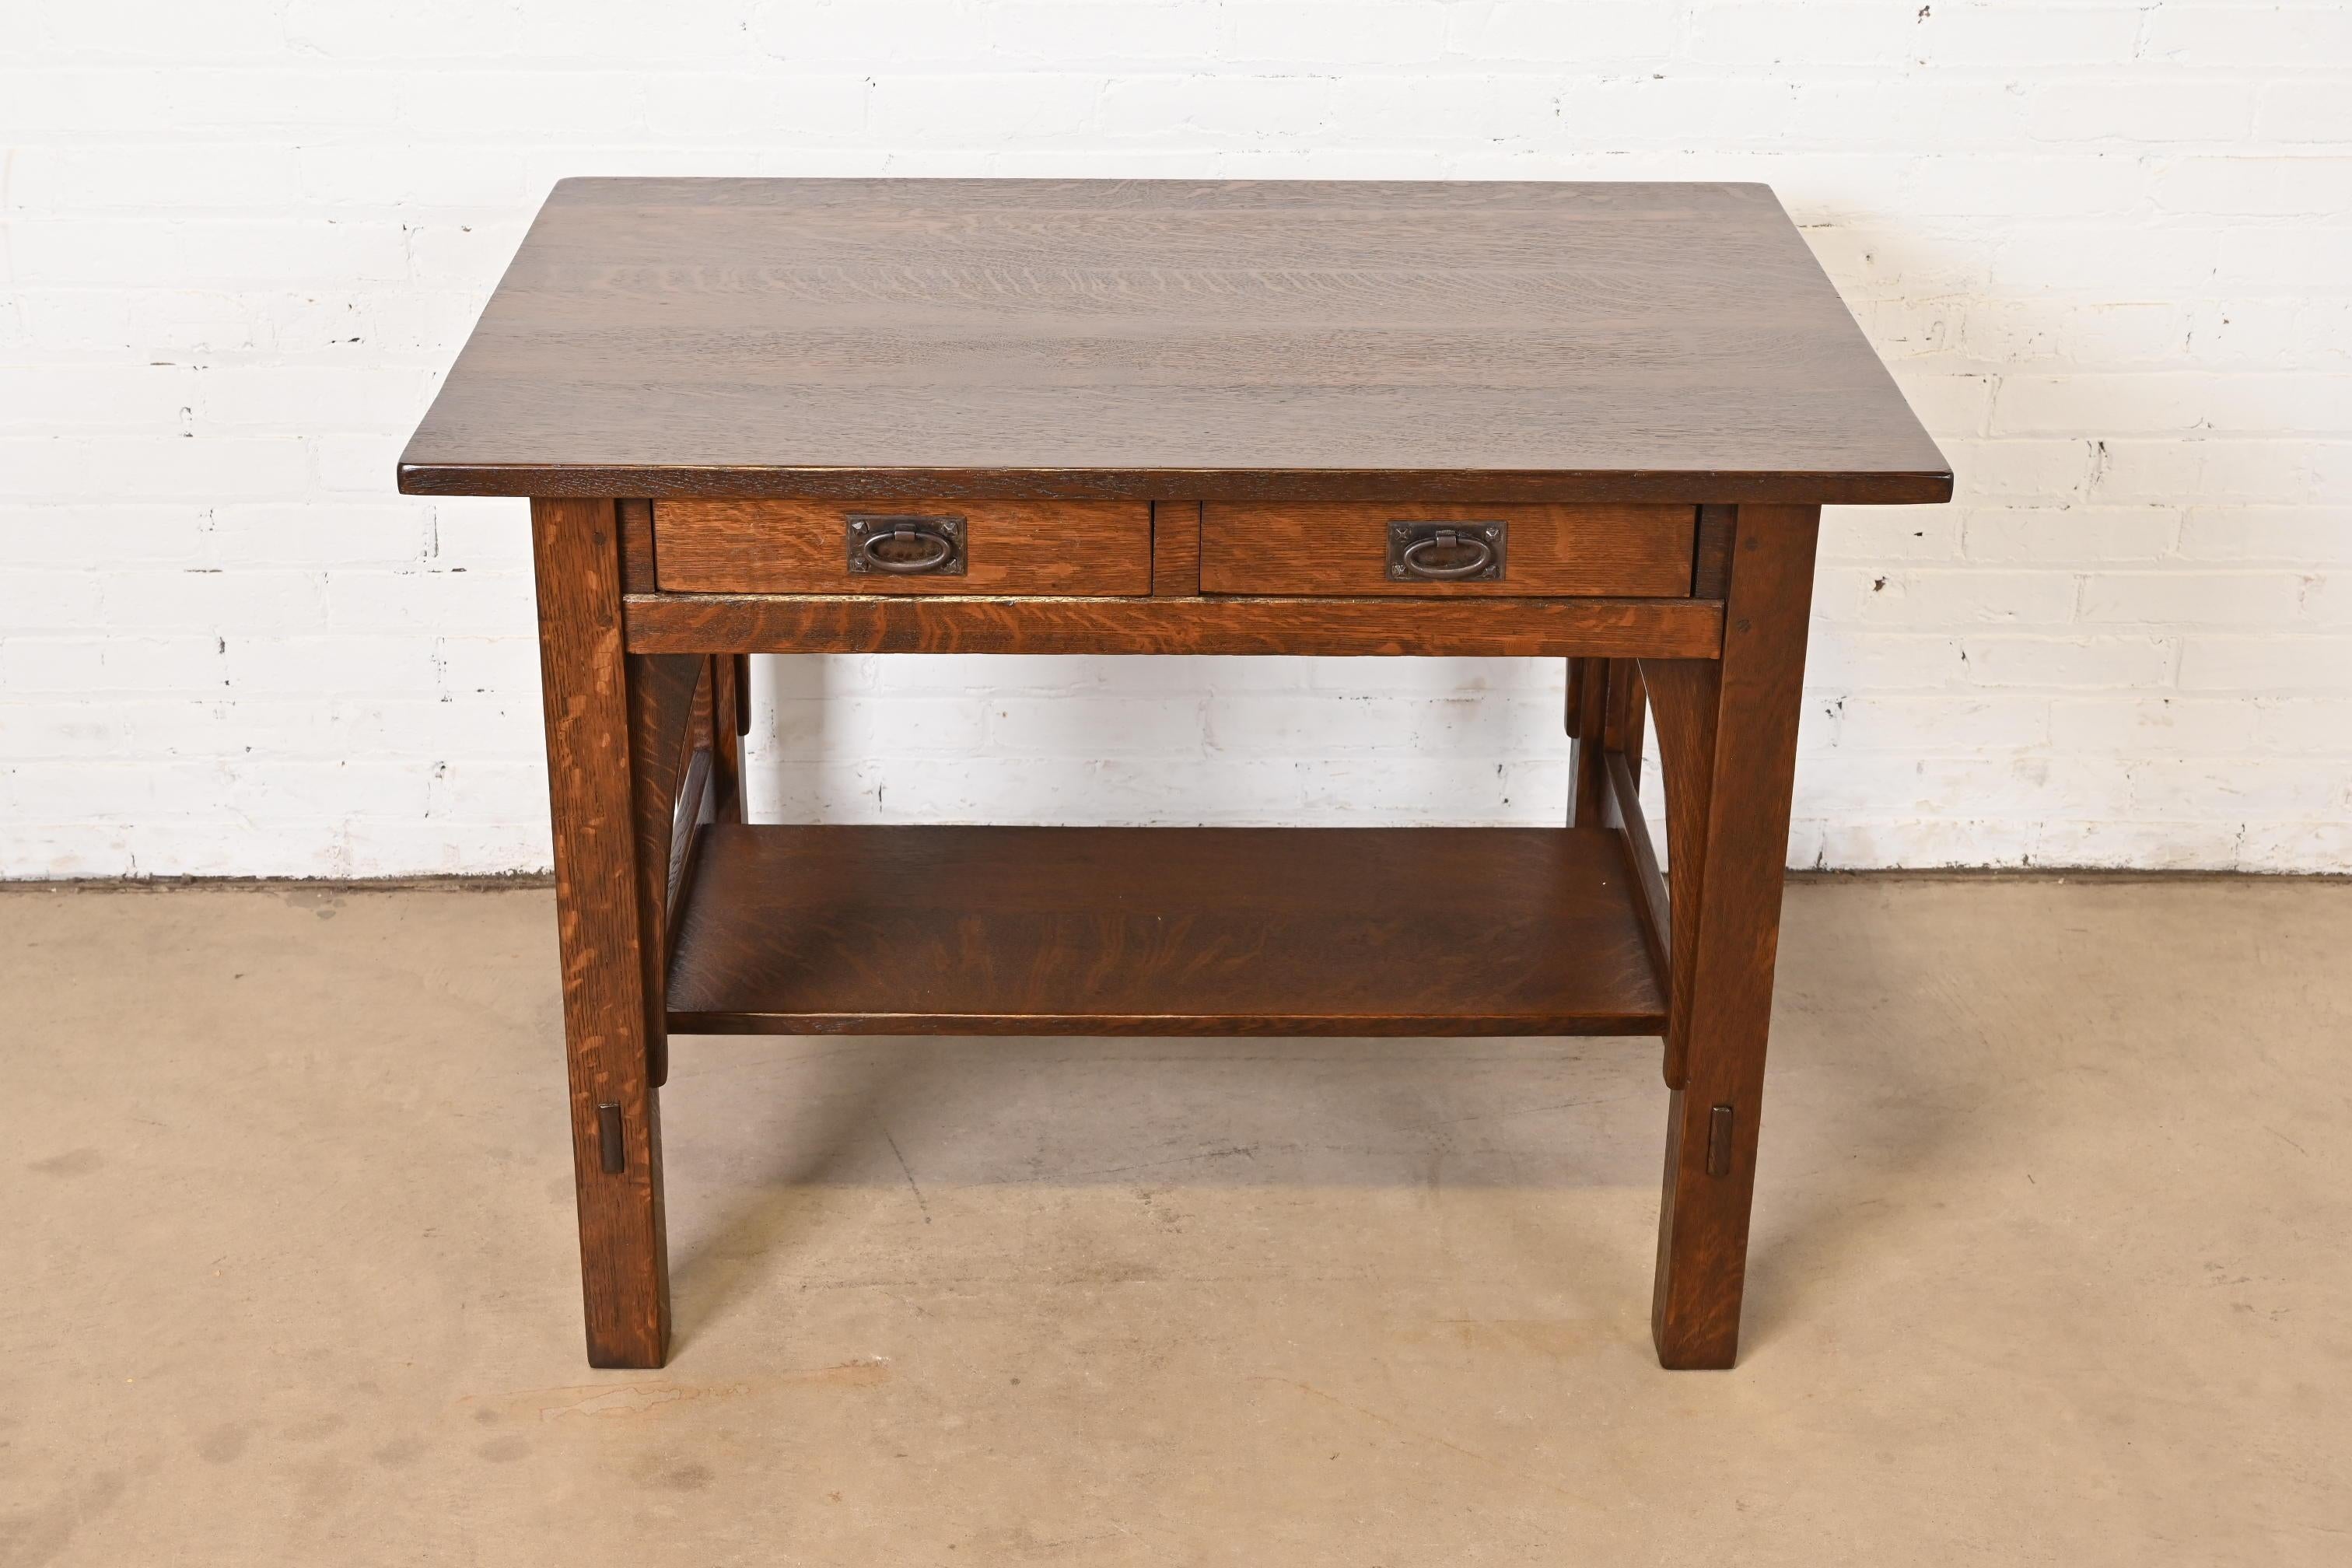 An exceptional antique Mission or Arts & Crafts writing desk or library table

By Gustav Stickley

USA, Circa 1900

Solid quarter sawn oak, with original hammered copper hardware.

Measures: 42